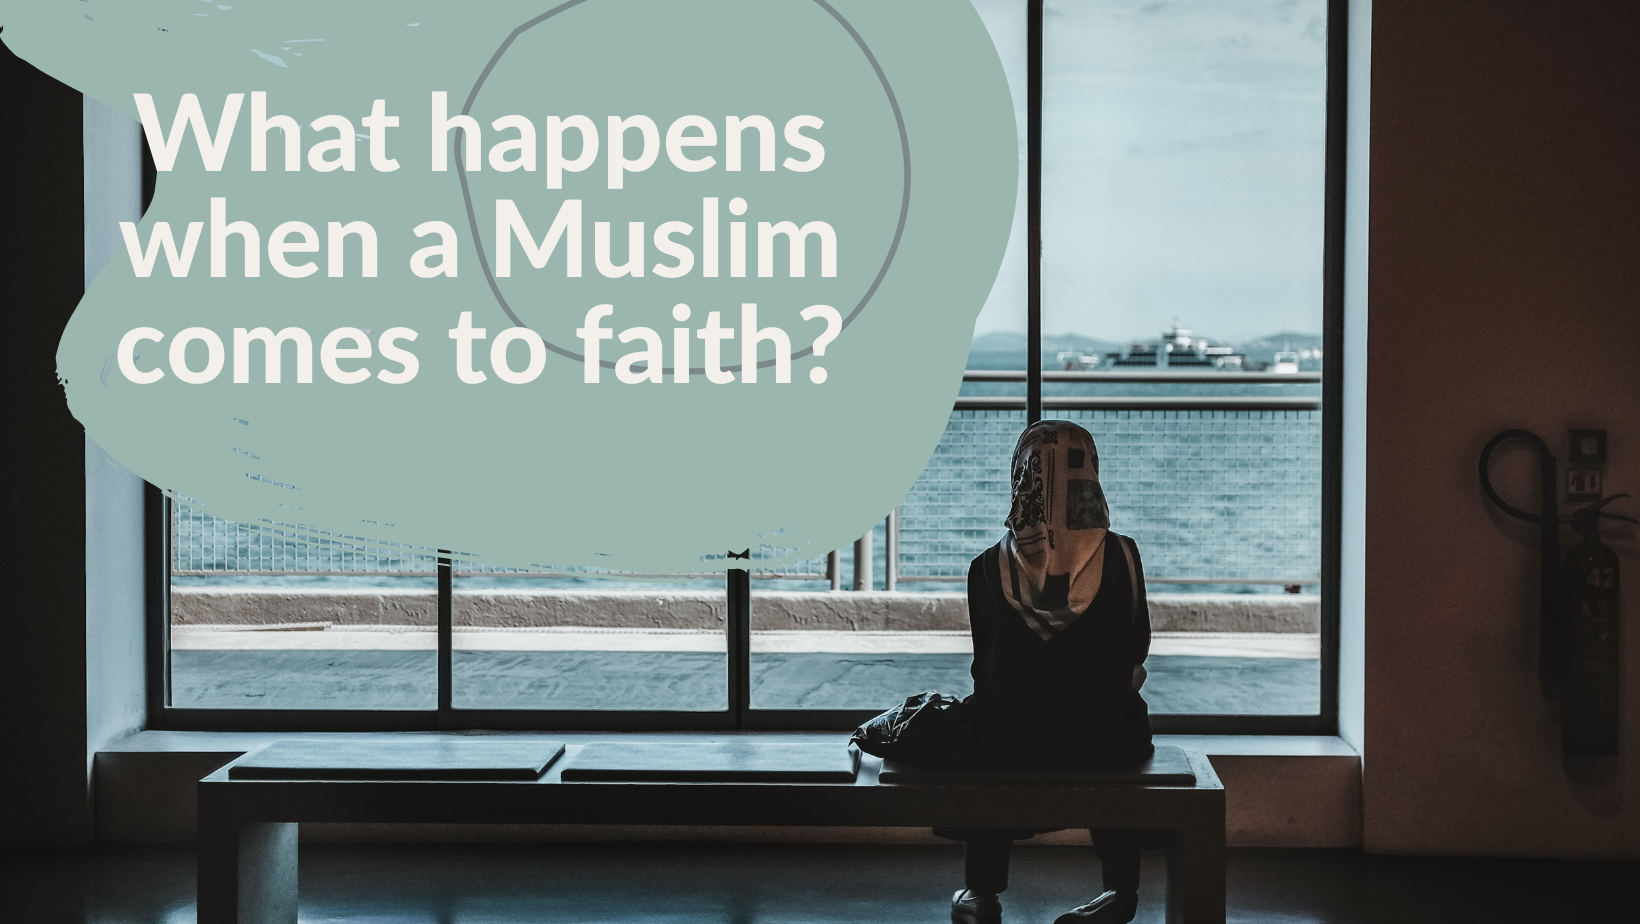 Muslim comes to faith